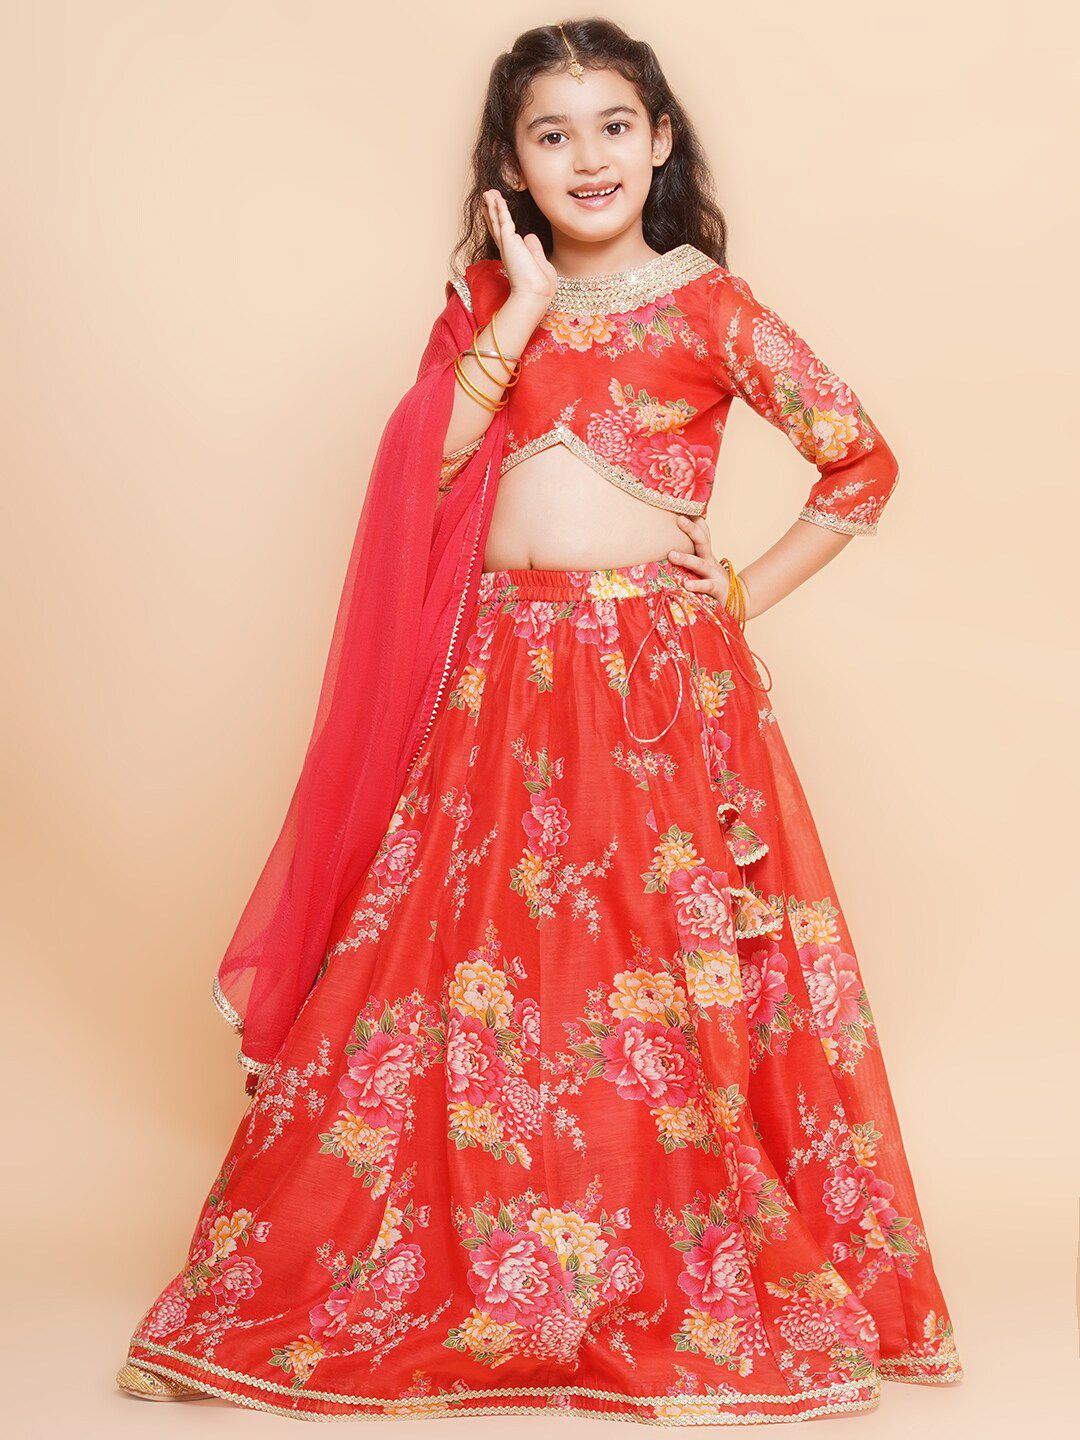 Bitiya by Bhama Girls Floral Printed Sequined Ready to Wear Lehenga & Blouse With Dupatta Price in India